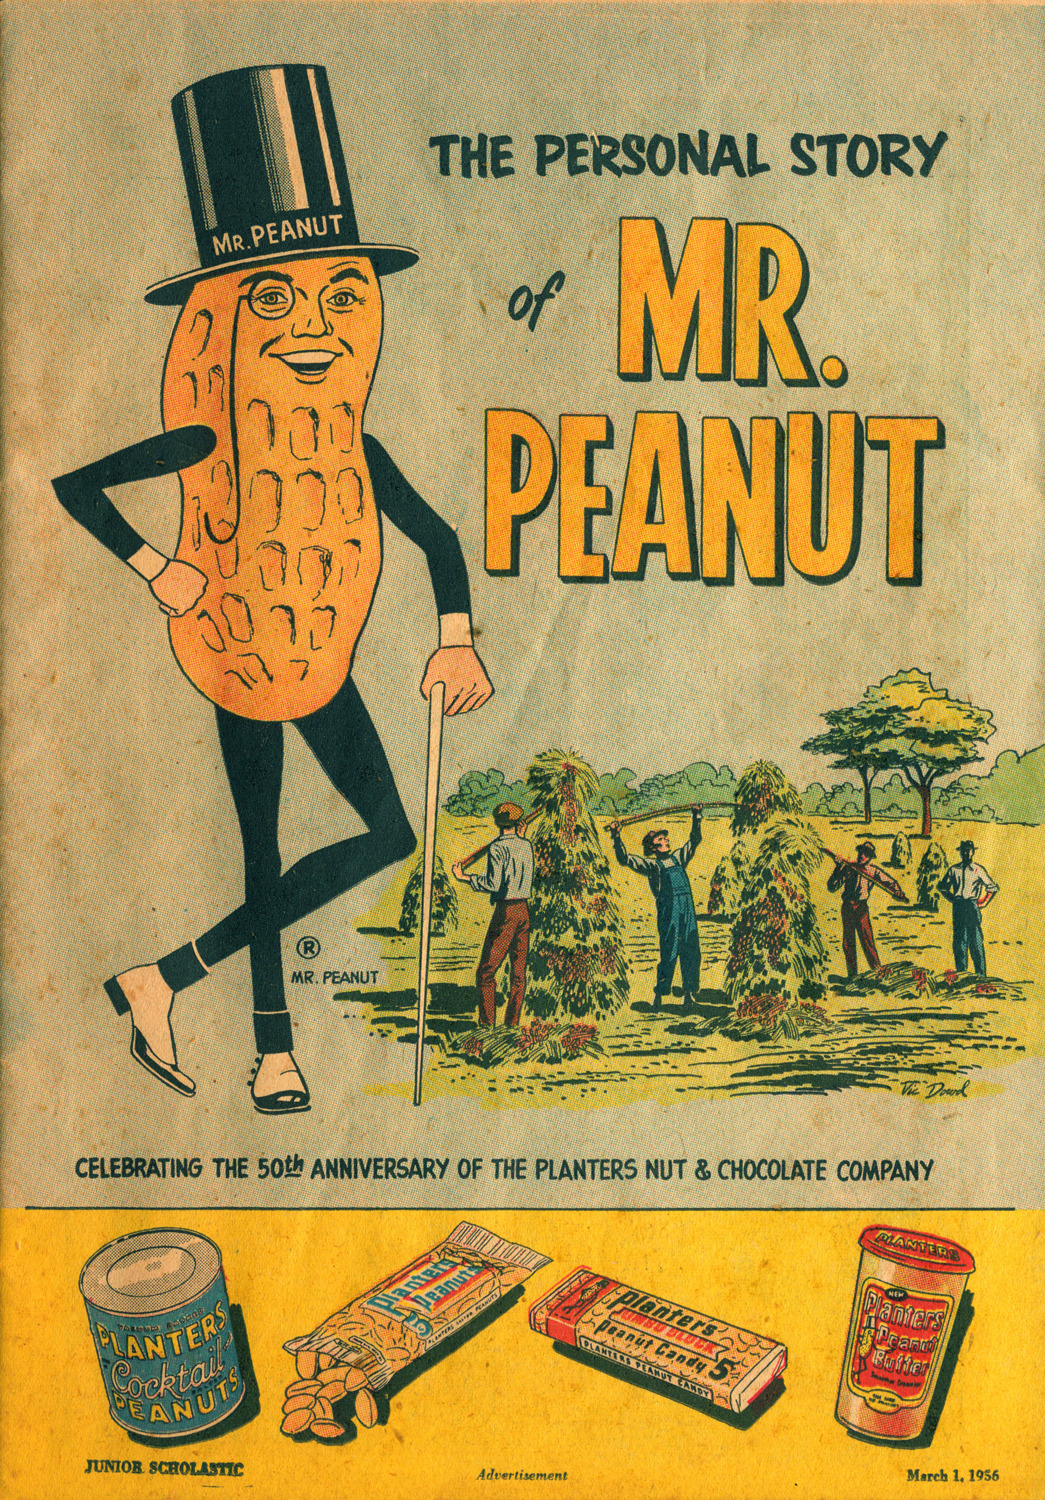 Planters Nut and Chocolate Company - 'The Personal Story of Mr. Peanut' - published in Junior Scholastic - March 1, 1956